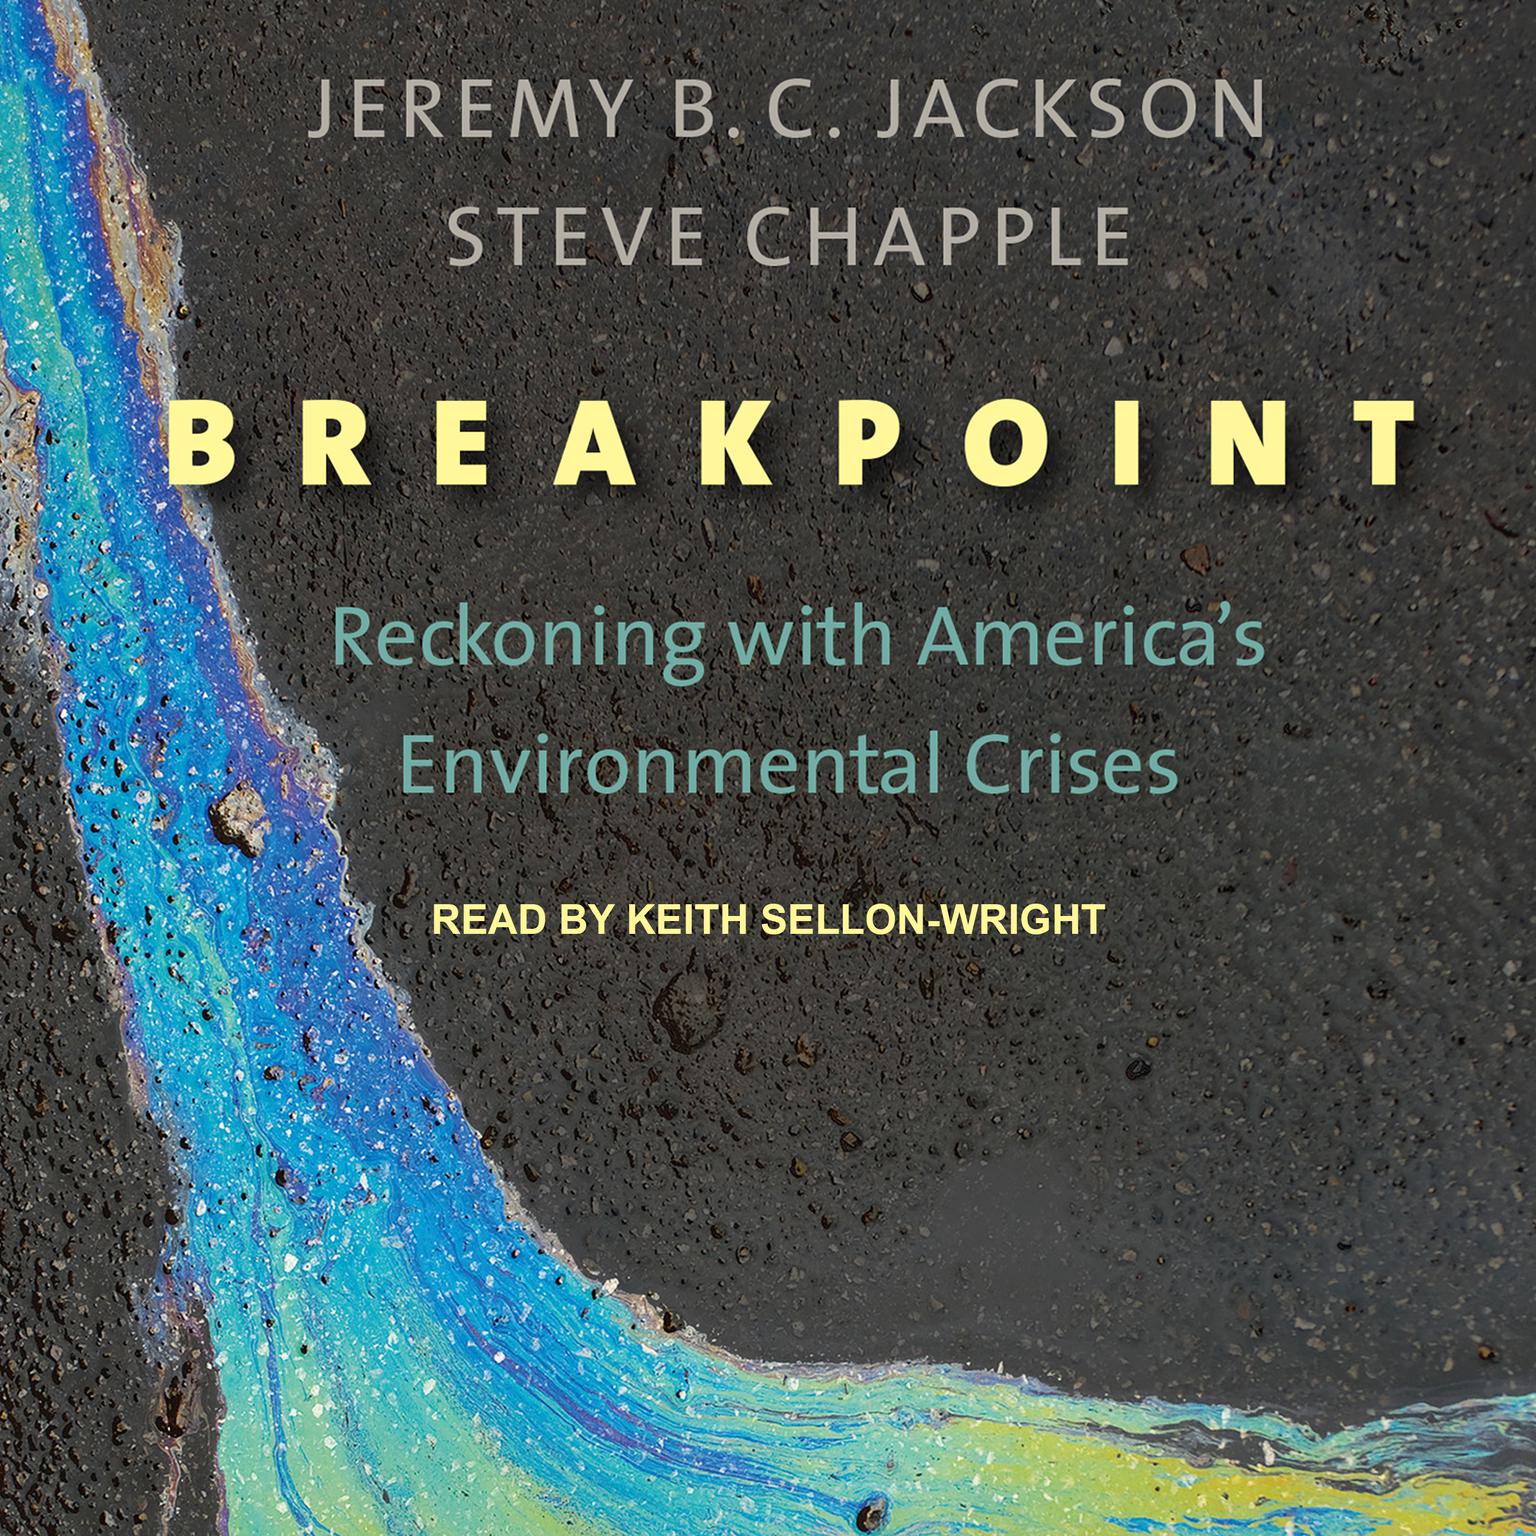 Breakpoint: Reckoning with America’s Environmental Crises Audiobook, by Jeremy B. C. Jackson